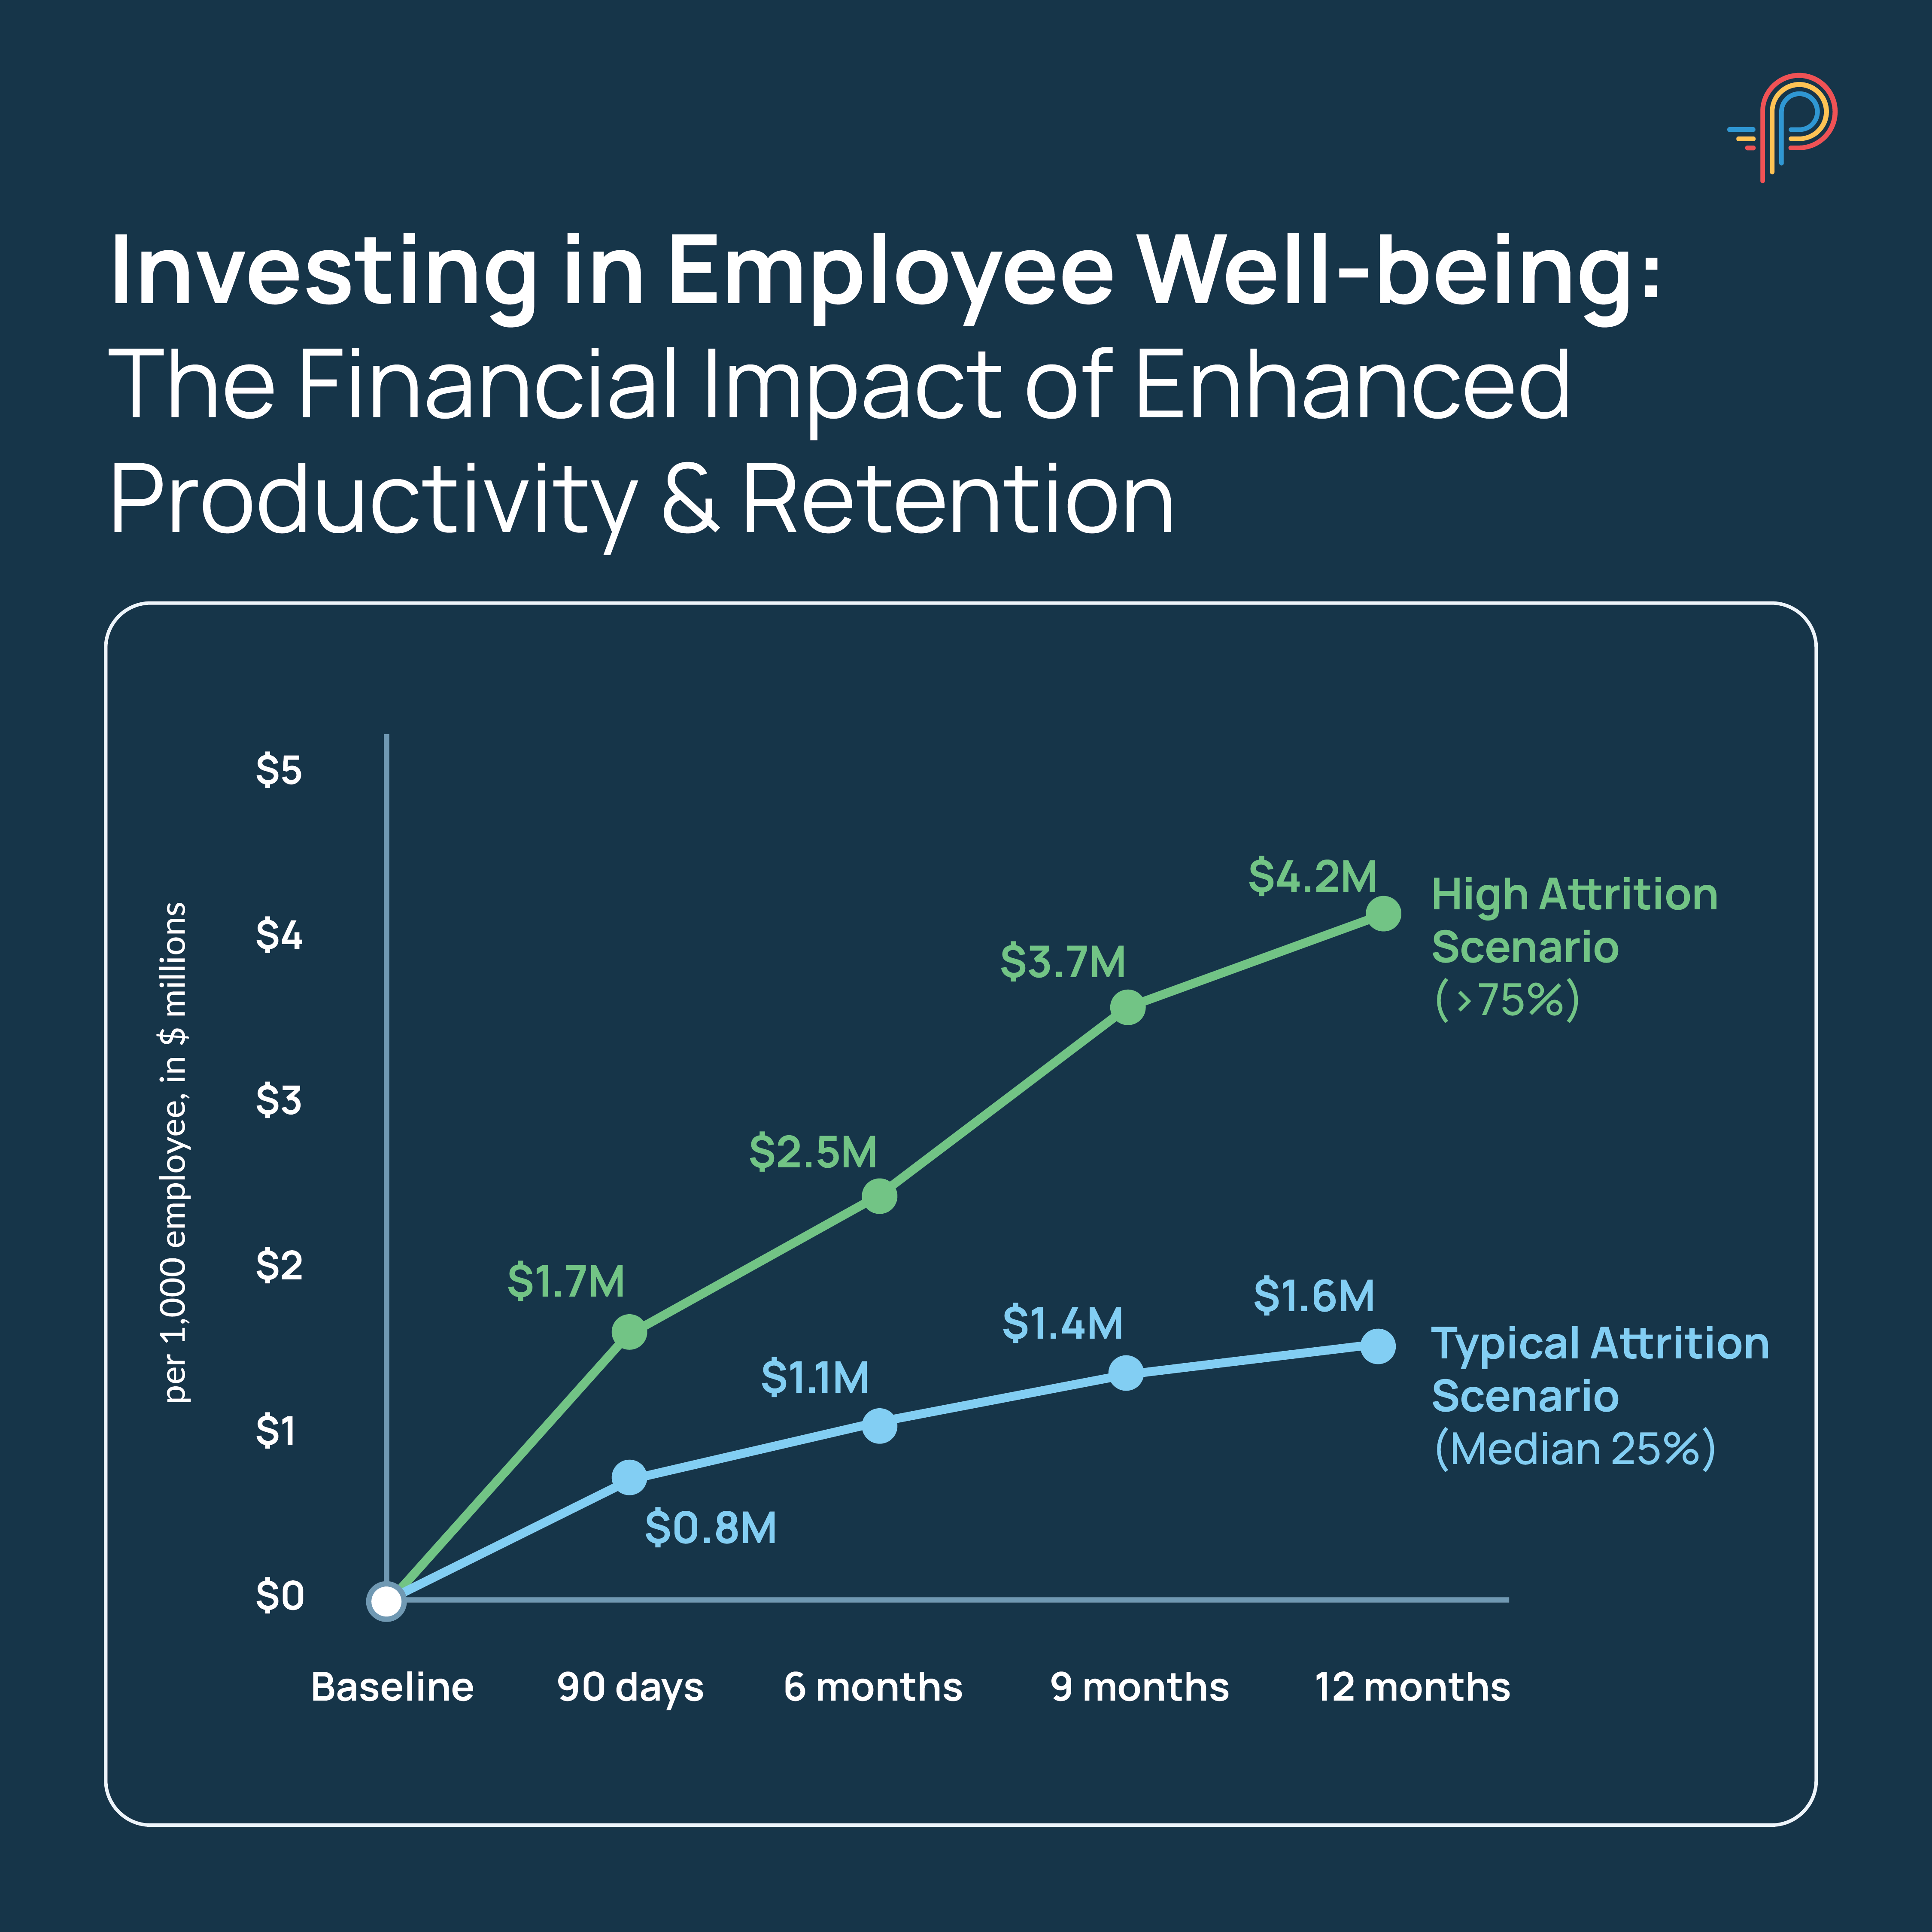 The financial impact of improved productivity and retention